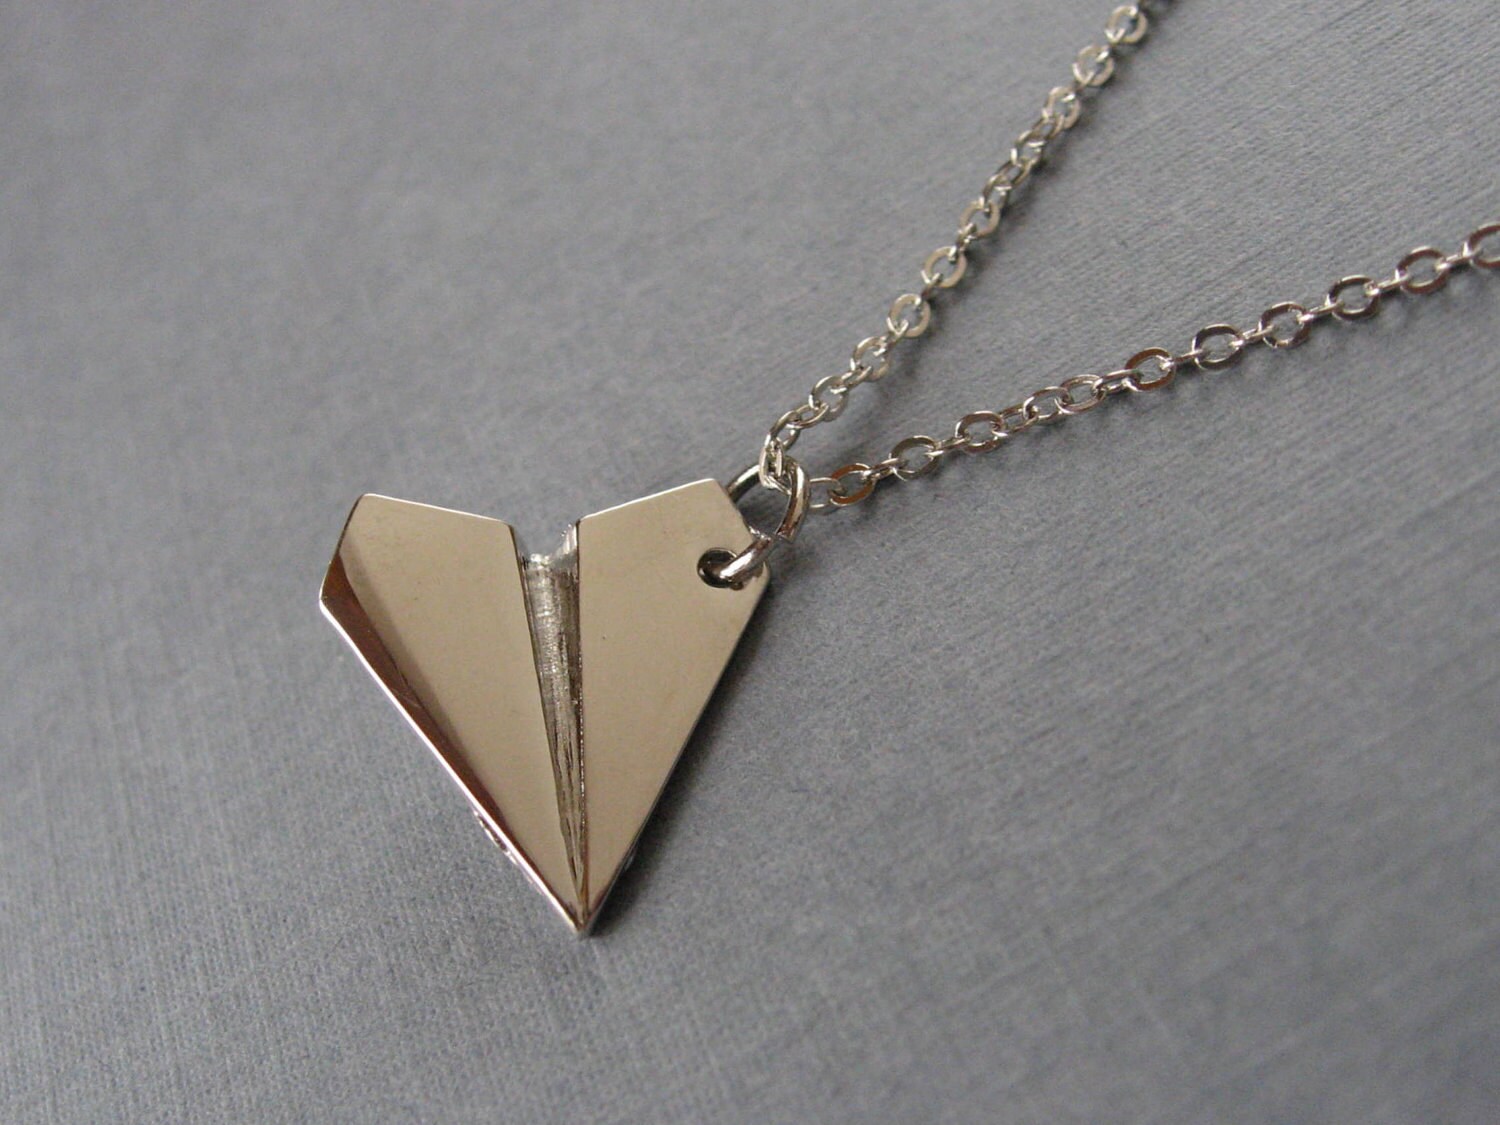 Paper Plane Necklace Paper airplane necklace, Airplane necklace, Plane necklace